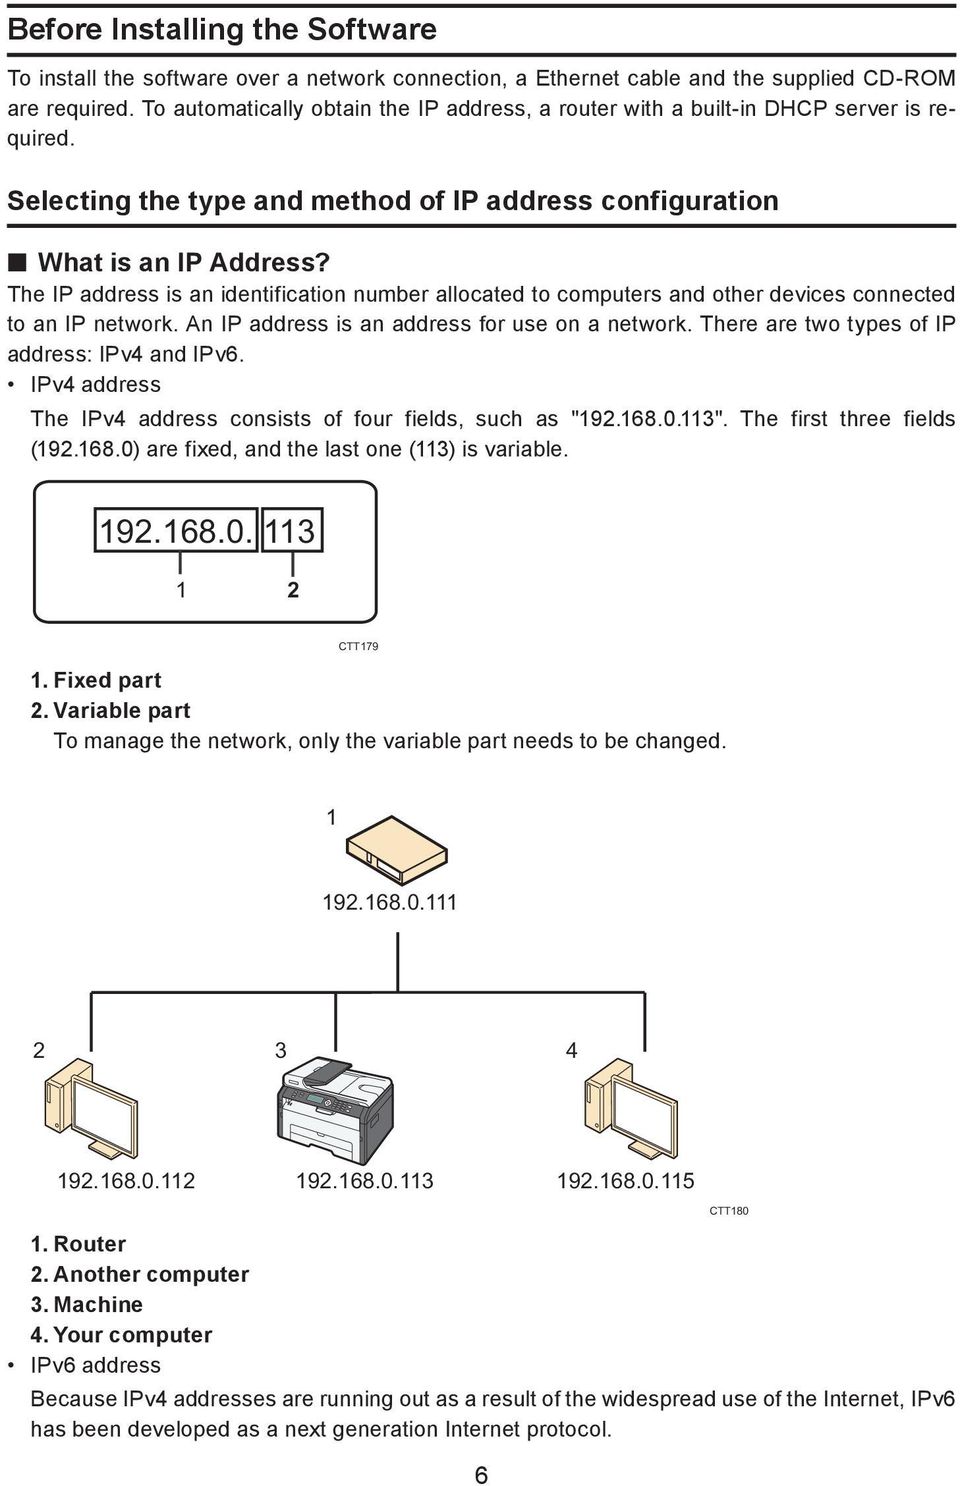 The IP address is an identification number allocated to computers and other devices connected to an IP network. An IP address is an address for use on a network.